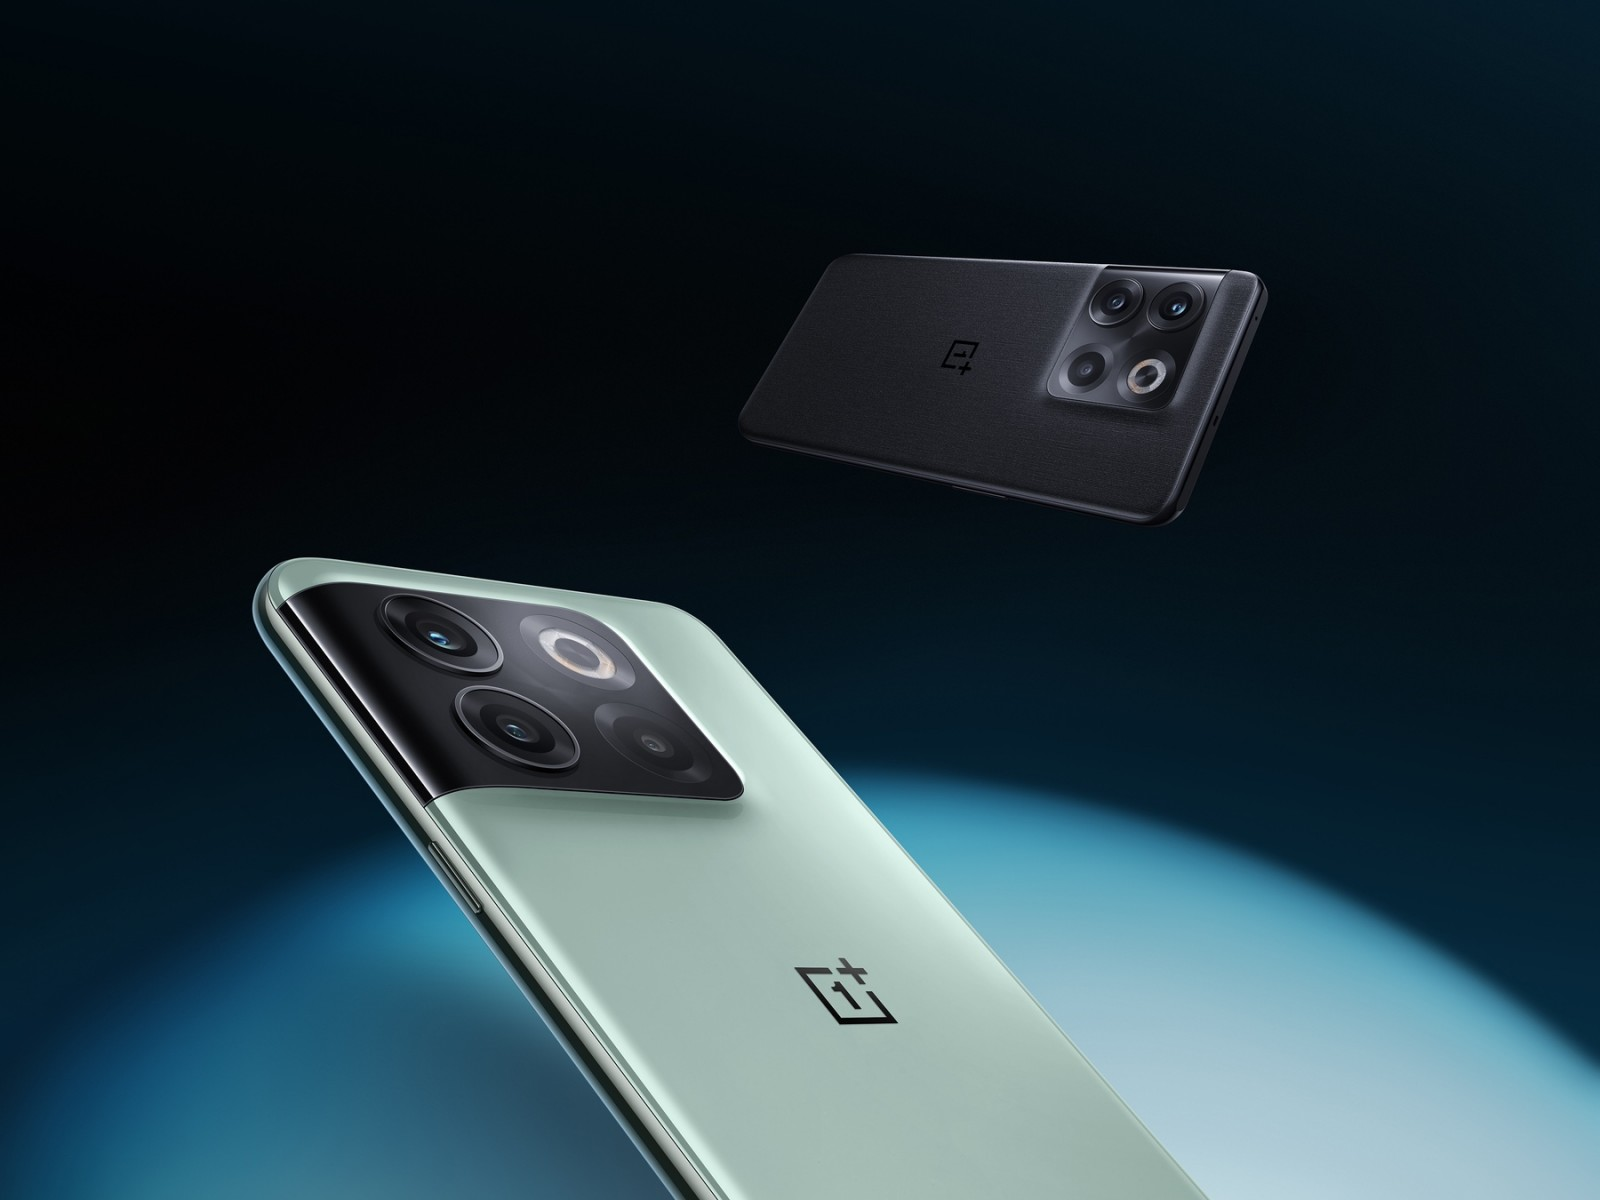 Latest smartphone from OnePlus offers flagship triple camera systems, innovative features 